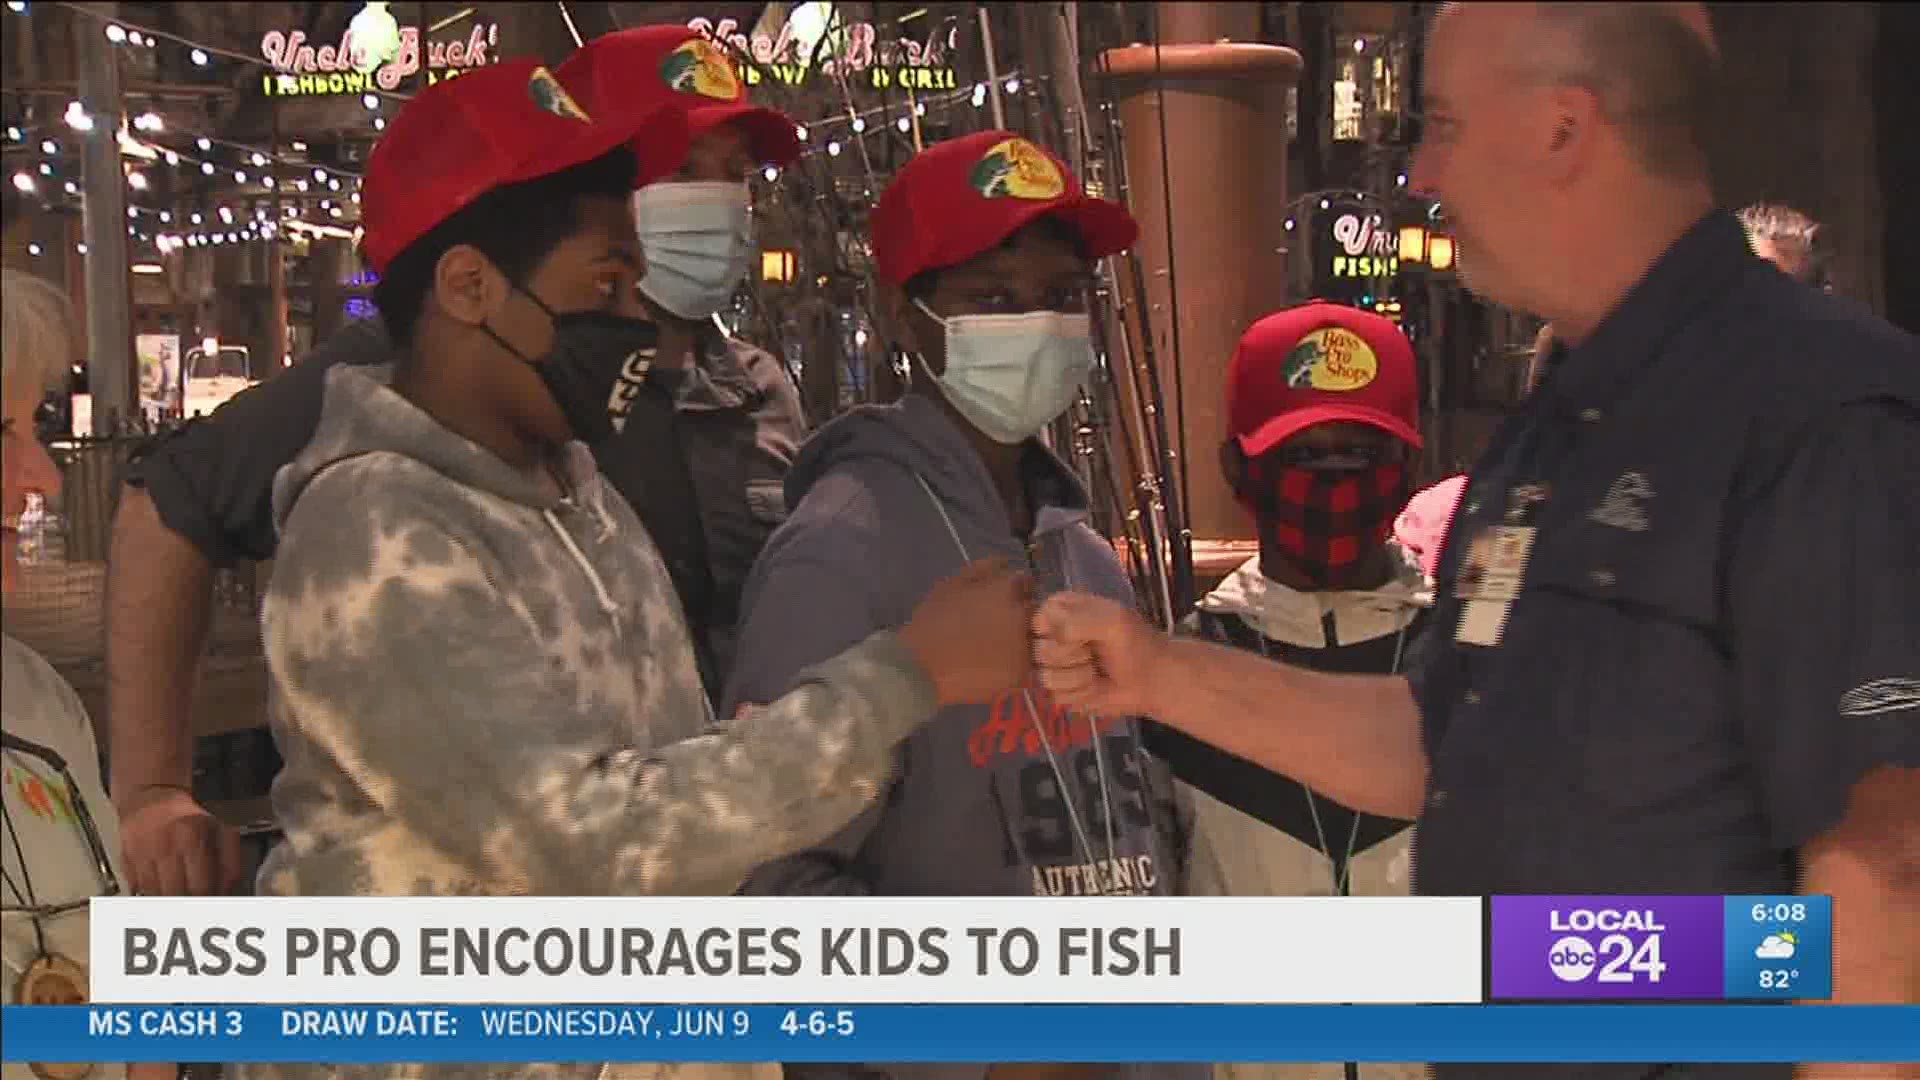 Bass Pro Shops gives away 500 fishing rods to kids in Memphis